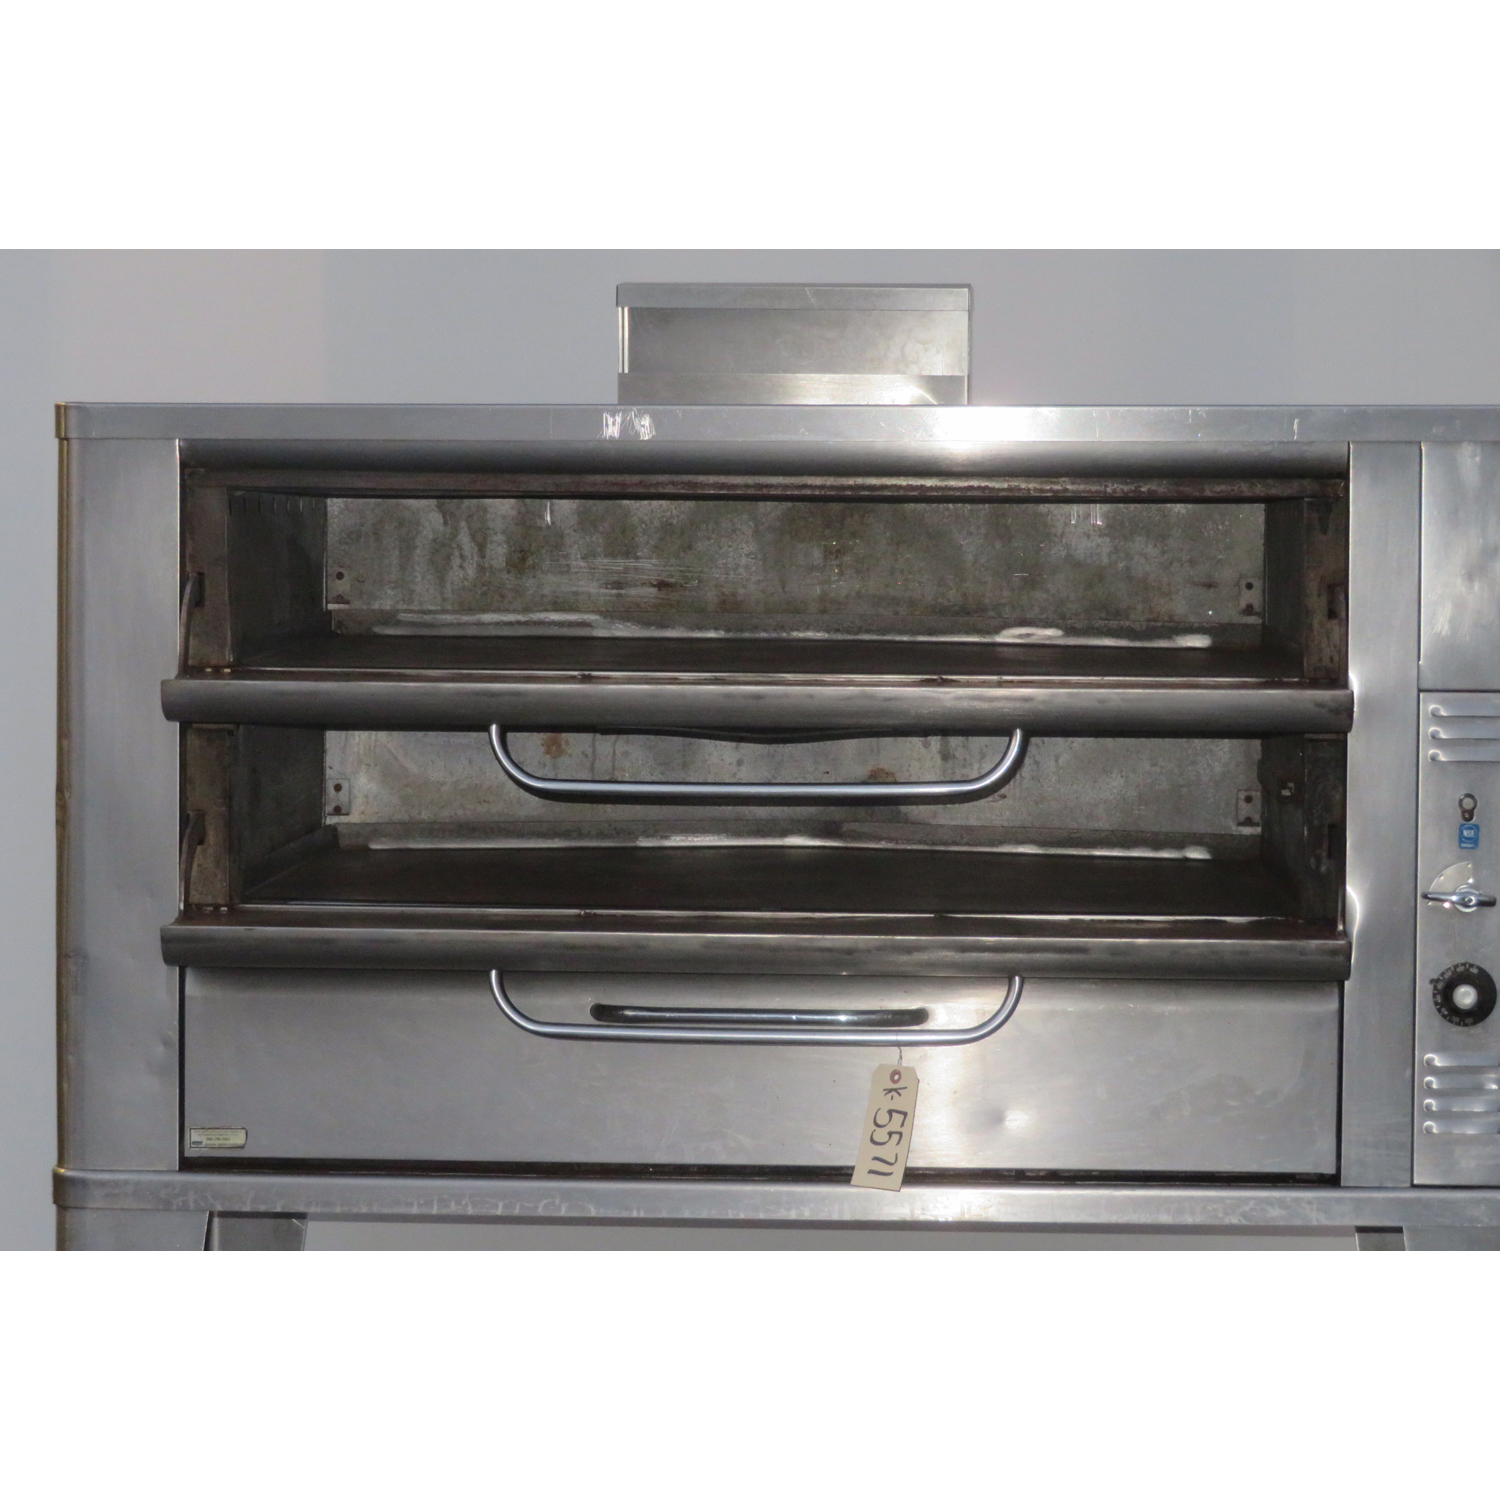 Blodgett 981 Deck Oven, Used Excellent Condition image 1